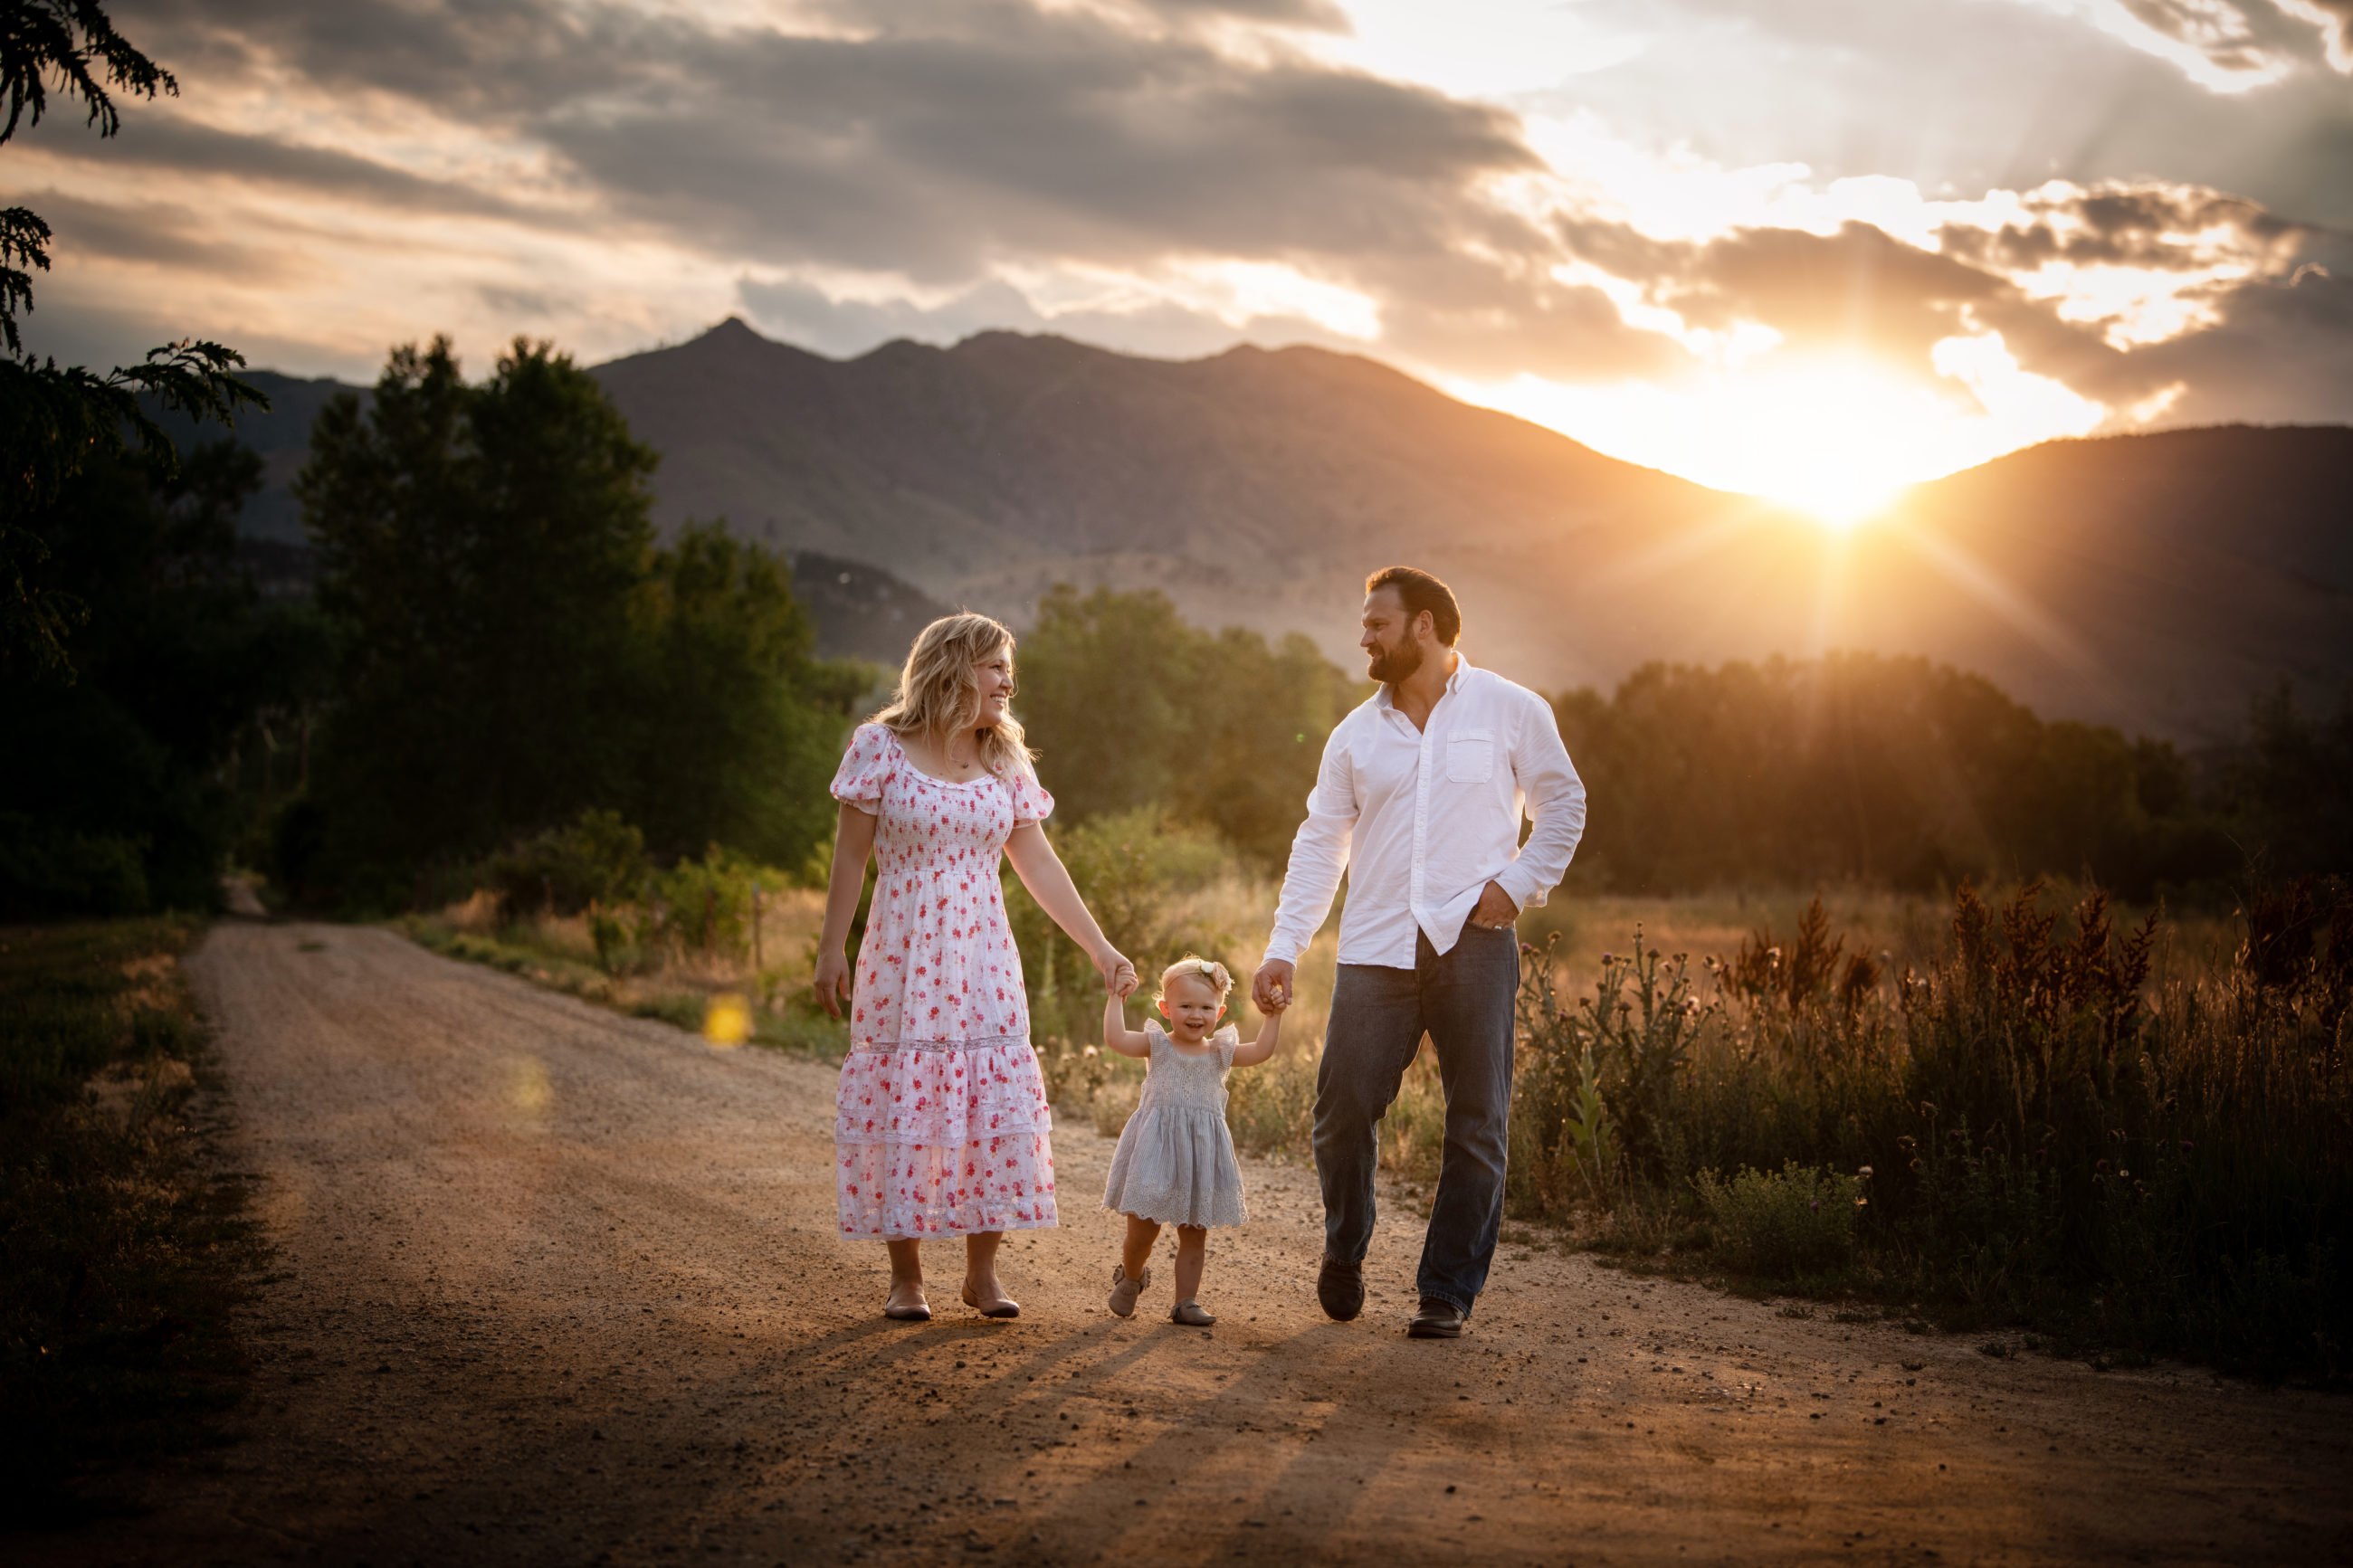 mom dad and baby girl walking down dirt road with mountains in background sun flare and pink dress